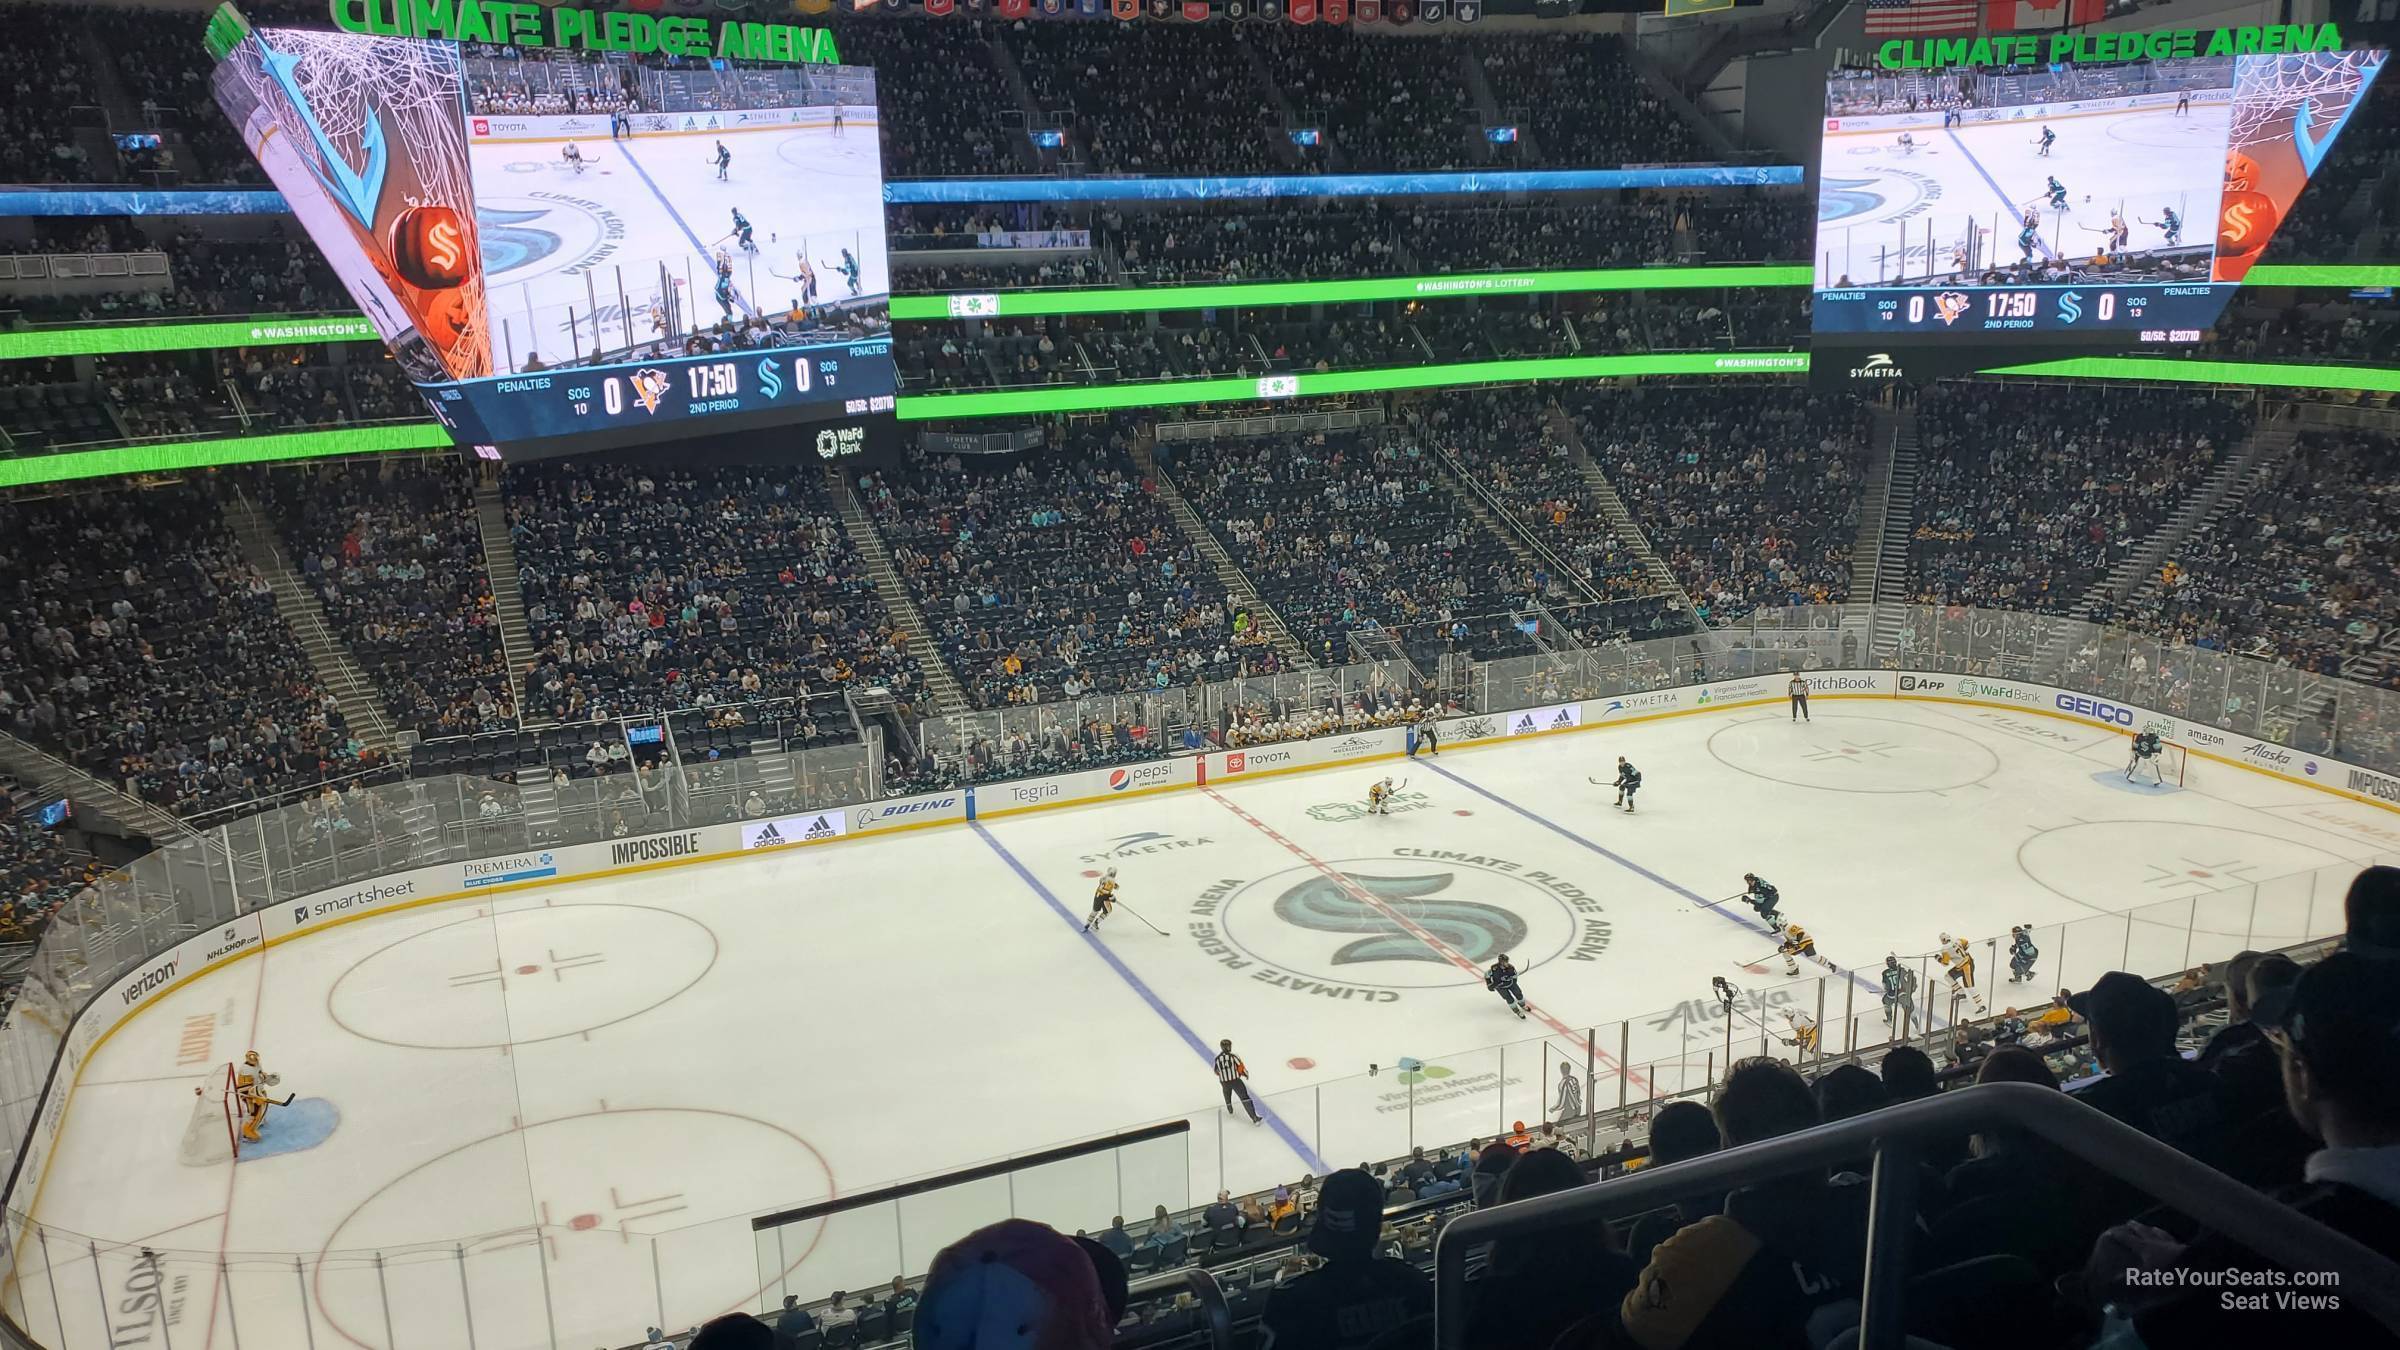 section 116, row bar seat view  for hockey - climate pledge arena